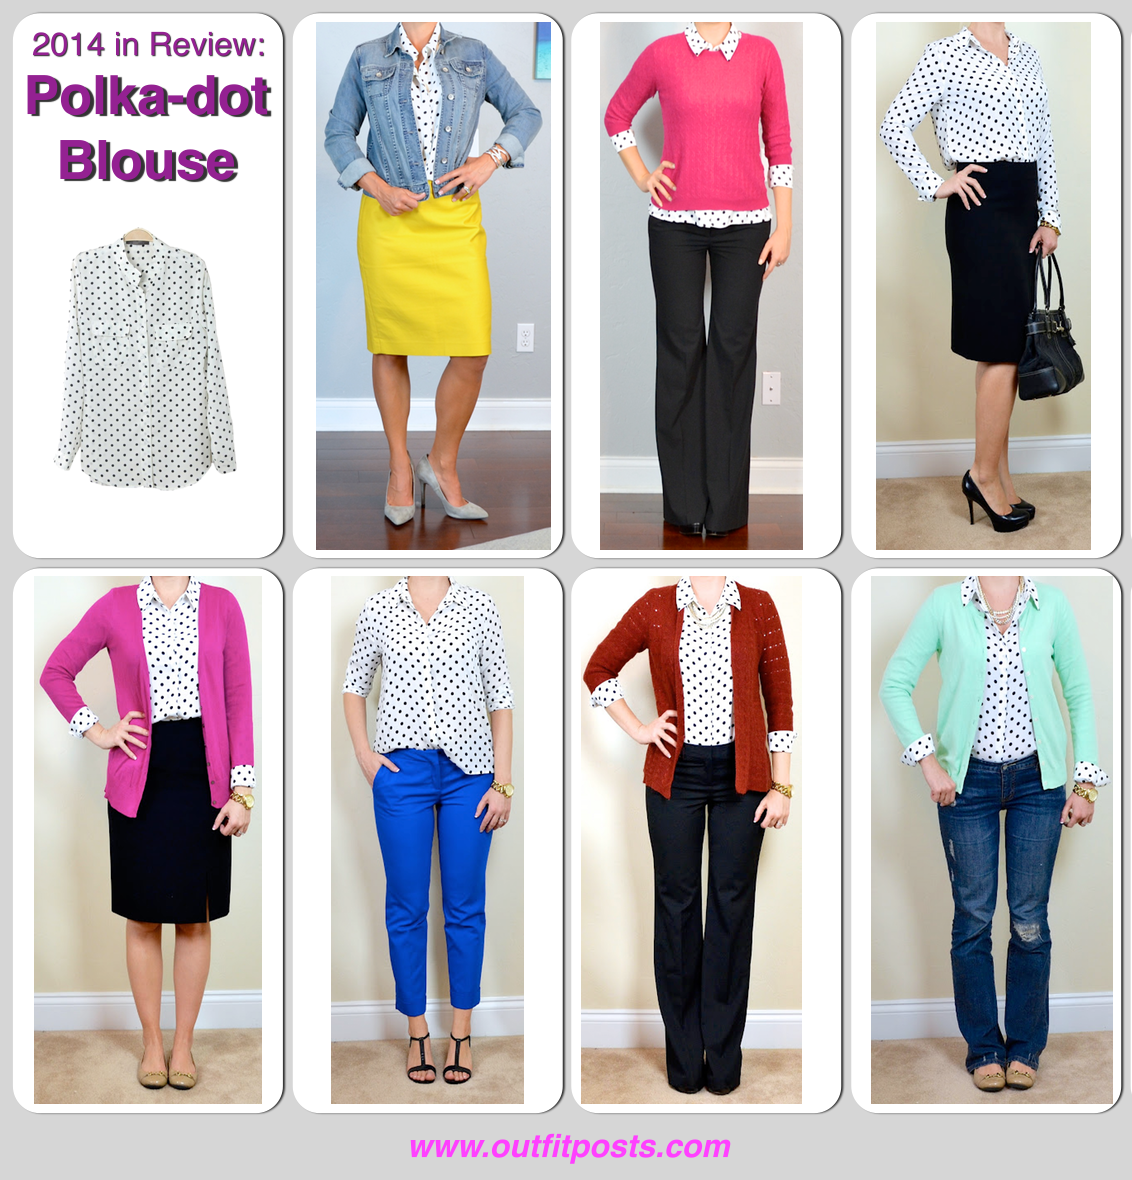 2014 in review - outfit posts: polka dot blouse - 7 ways